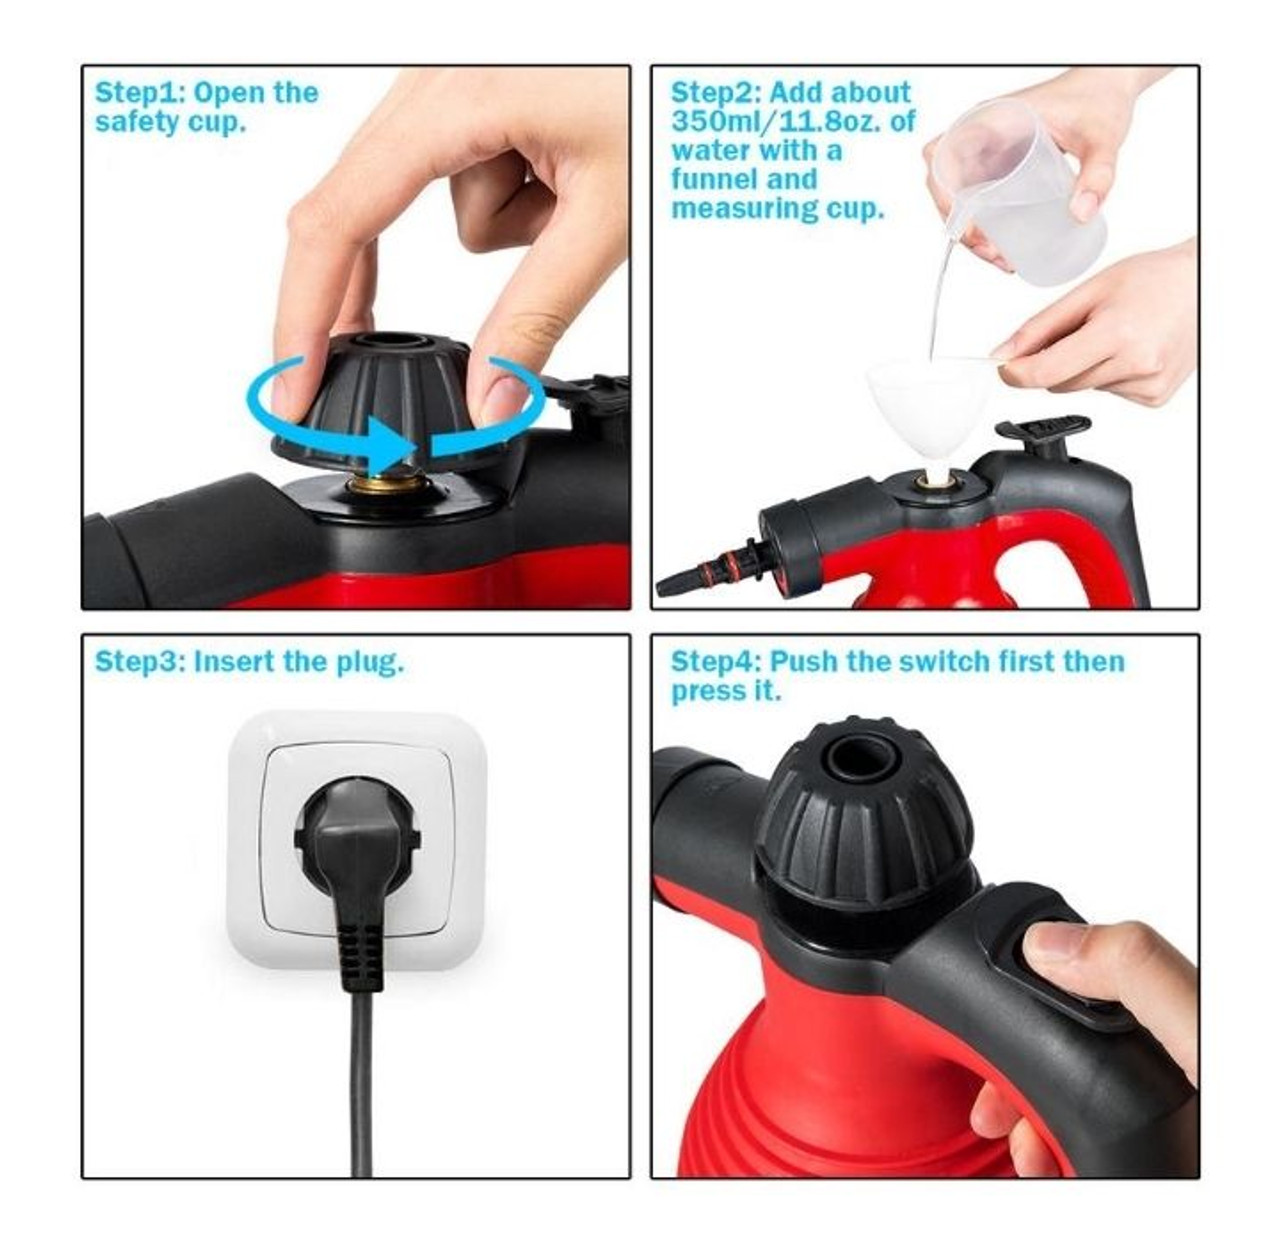 Multifunction Portable 1050W Steam Cleaner  product image